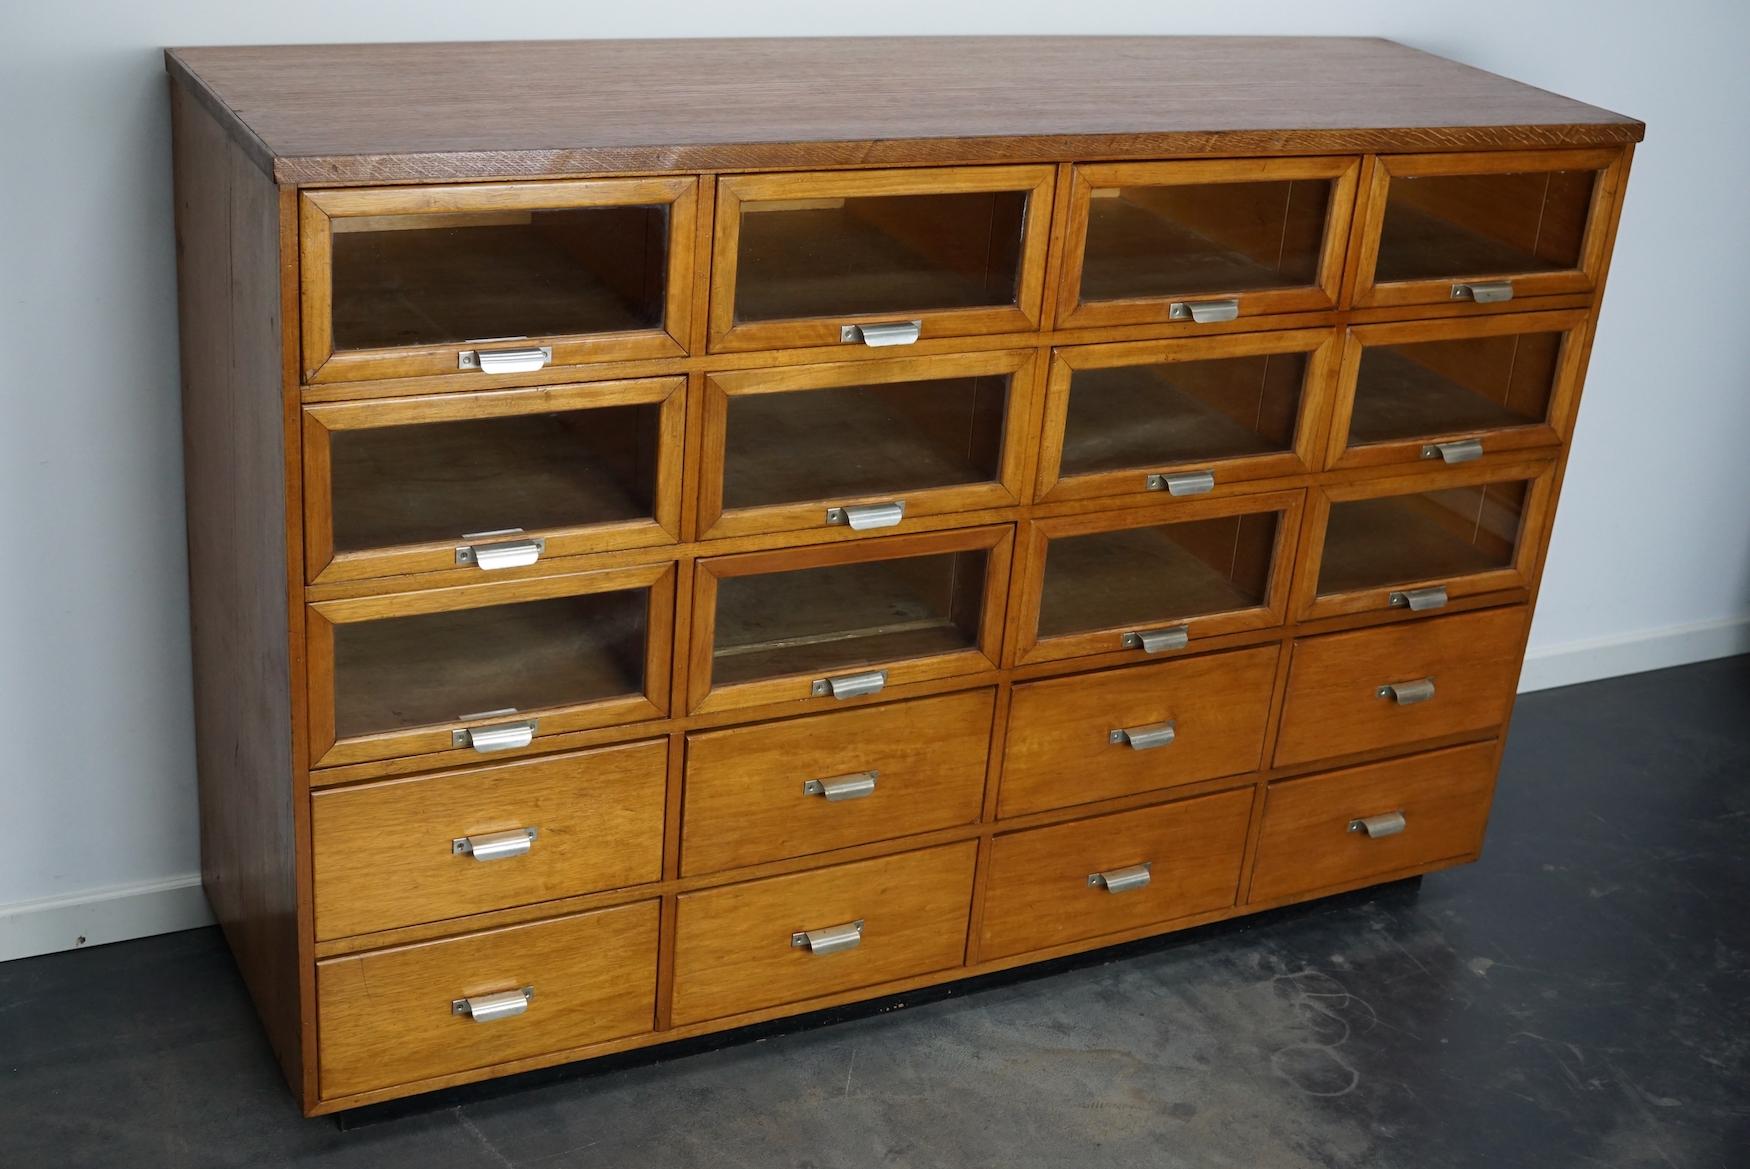 This haberdashery cabinet was produced during the 1950s in the Netherlands. This piece features 20 drawers in beech with glass fronts and metal handles. It was originally used in a luxury warehouse in the city of Maastricht. The interior dimensions